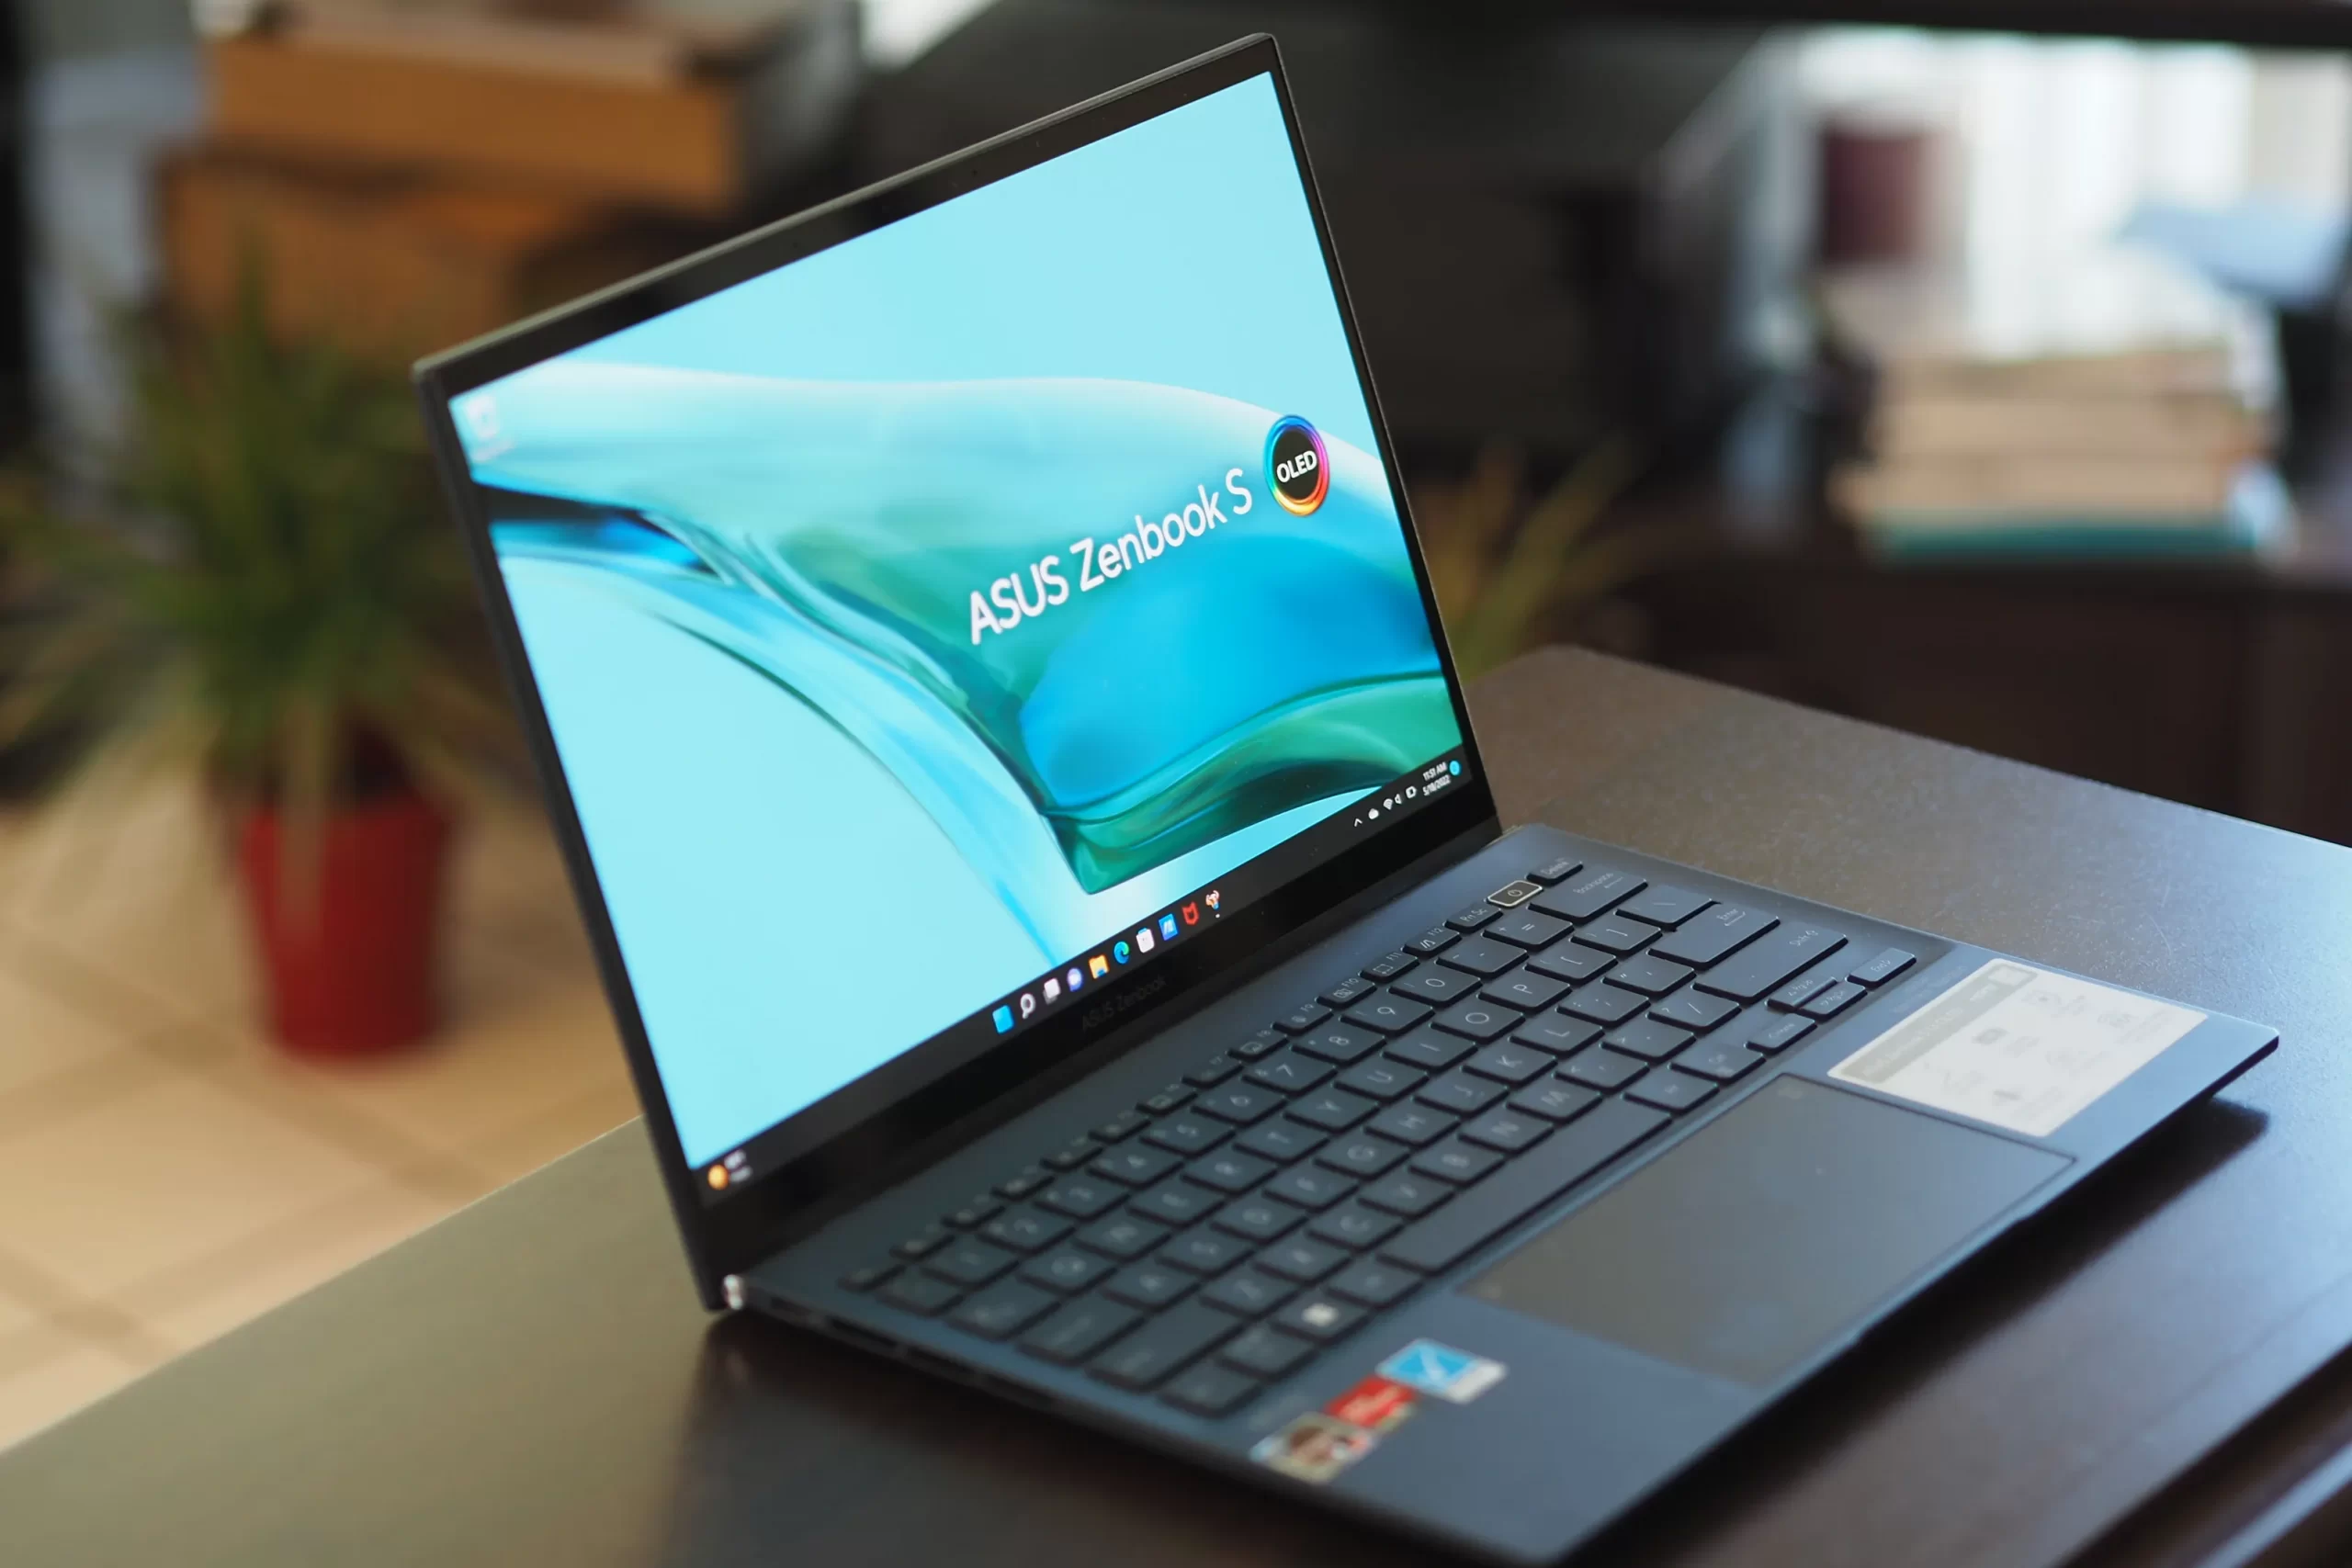 Asus Zenbook S 13 Review: A lithe, light and lovely little laptop